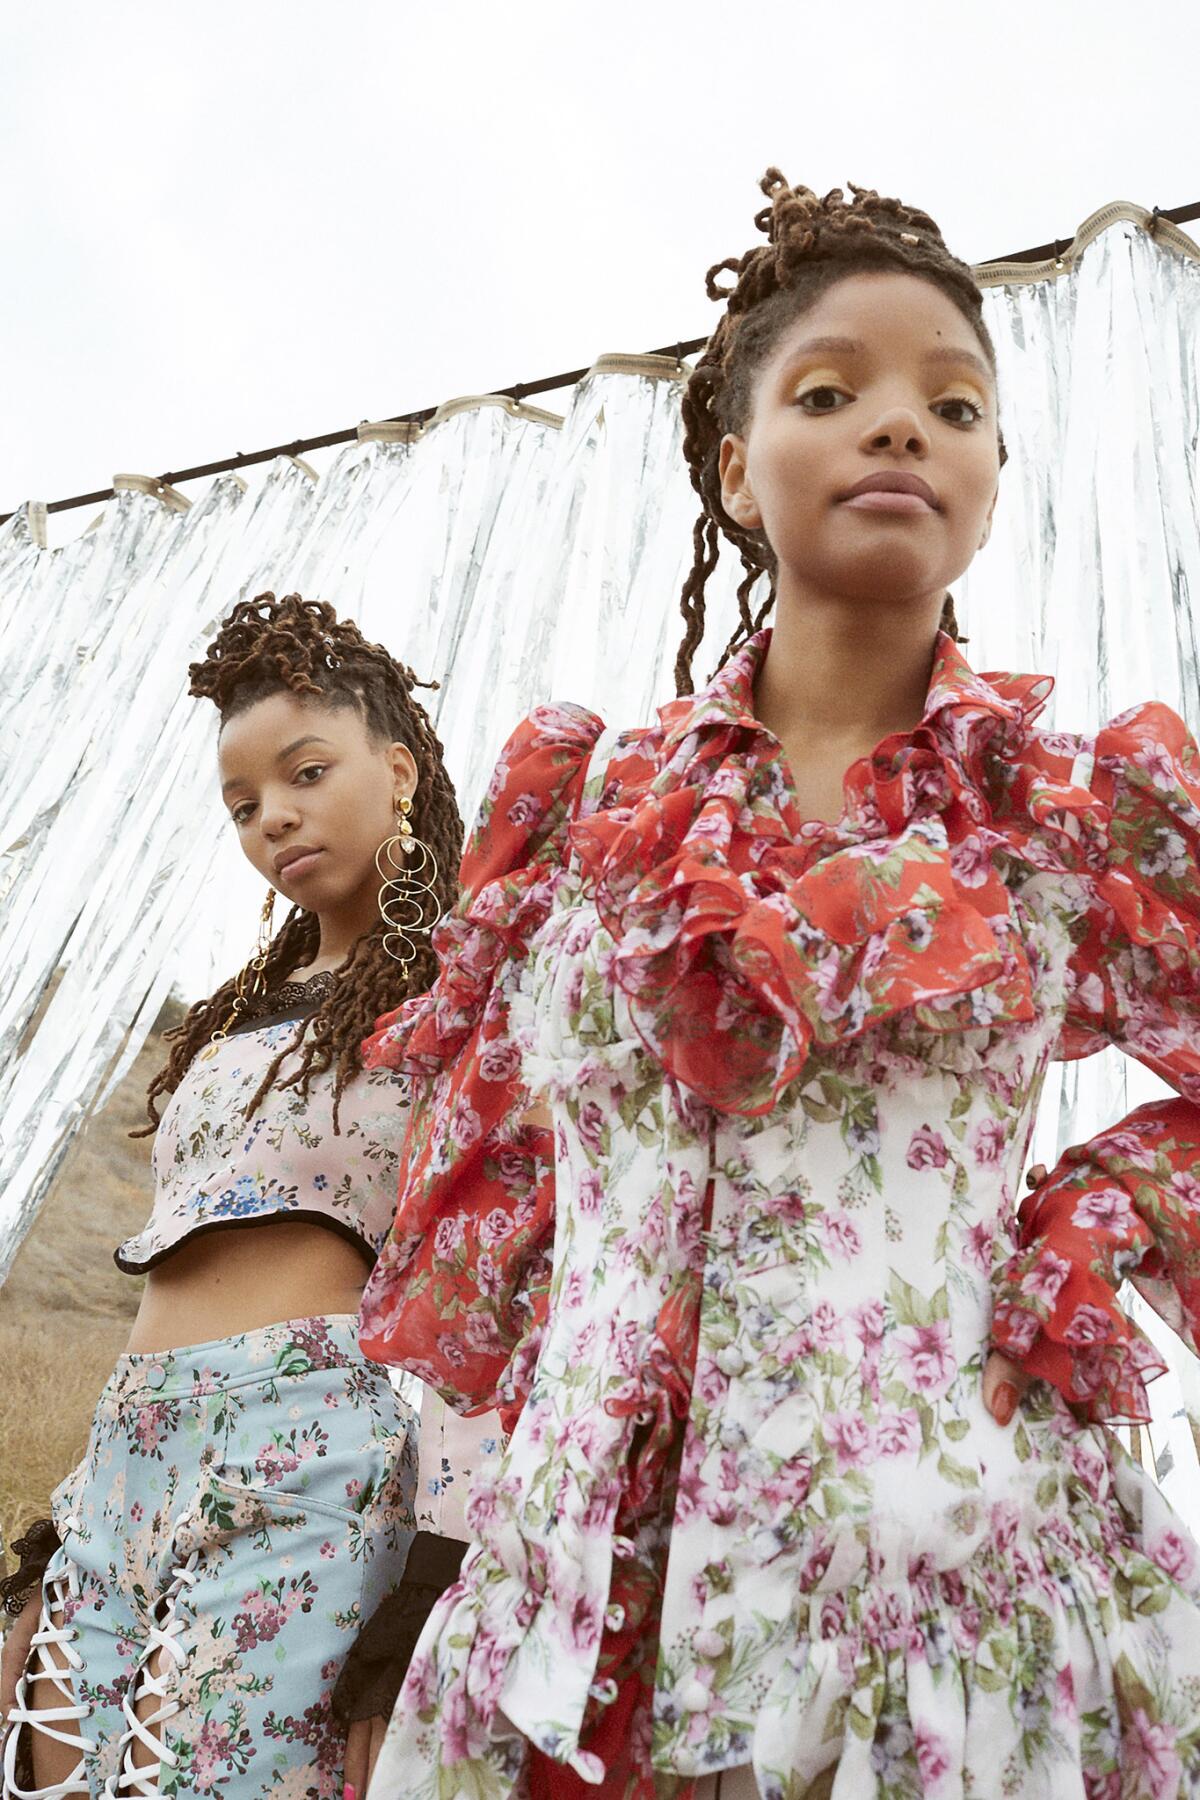 Halle and Chloe Bailey are getting noticed by brands because of their own take on fashion and style.